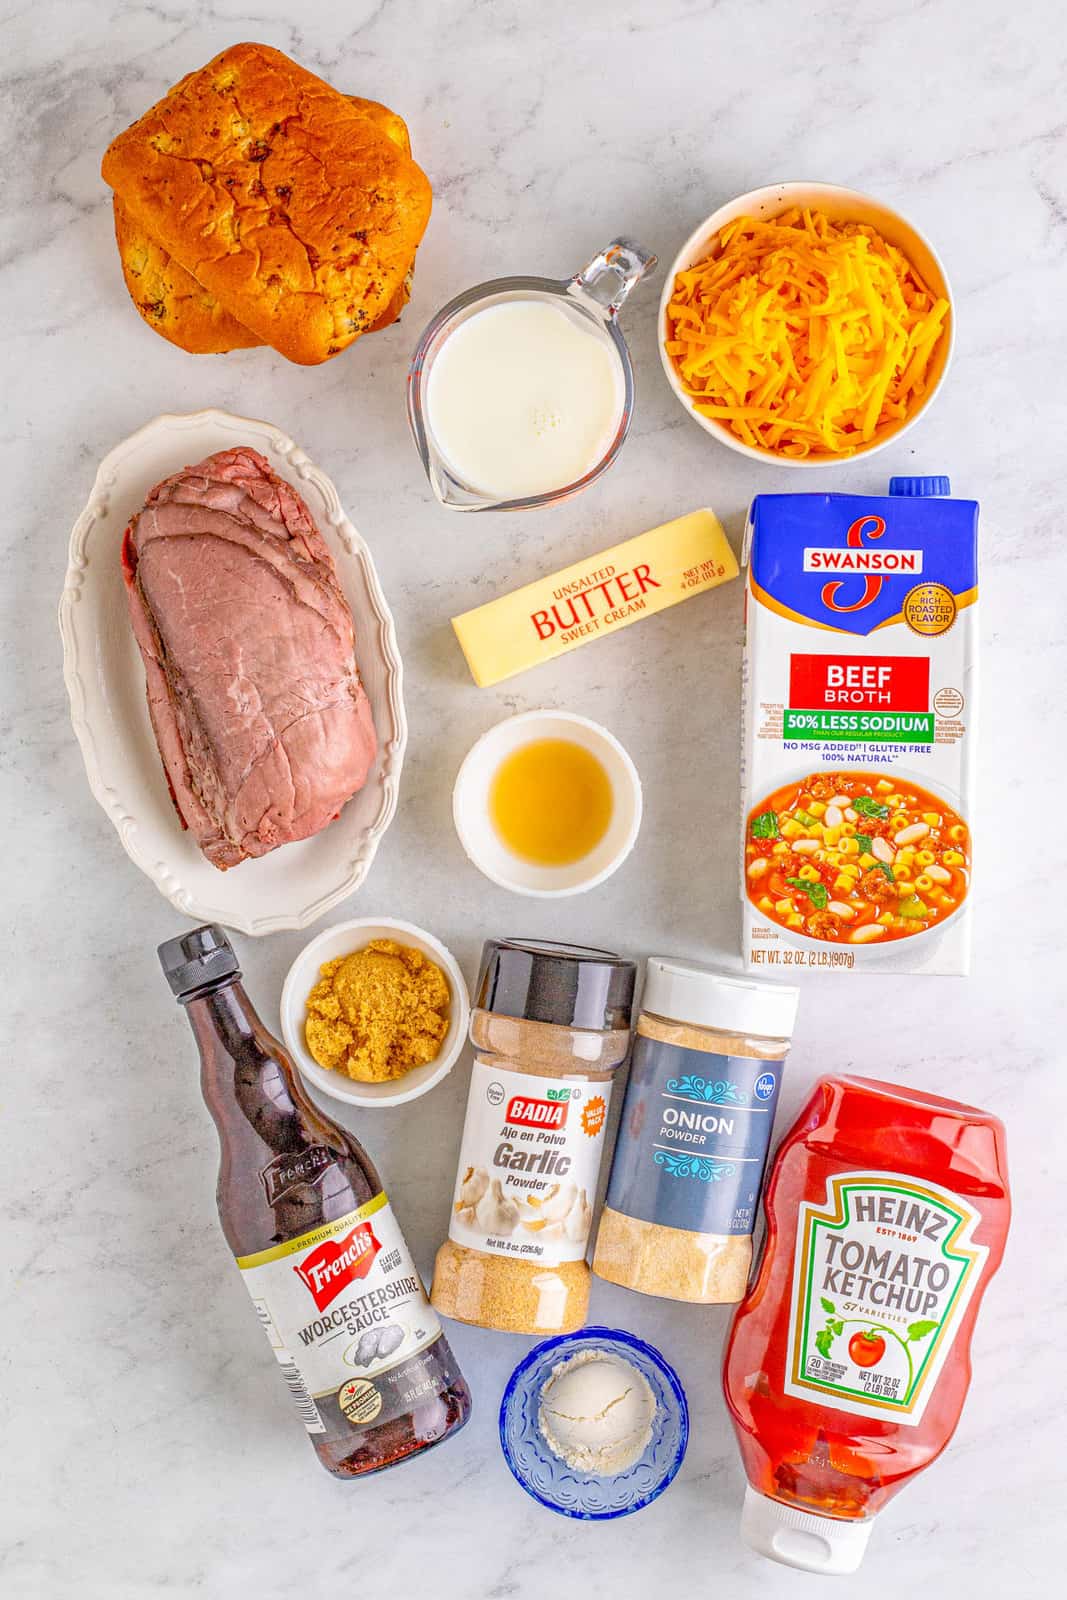 Ingredients needed to make a Copycat Arby's Roast Beef and Cheddar.